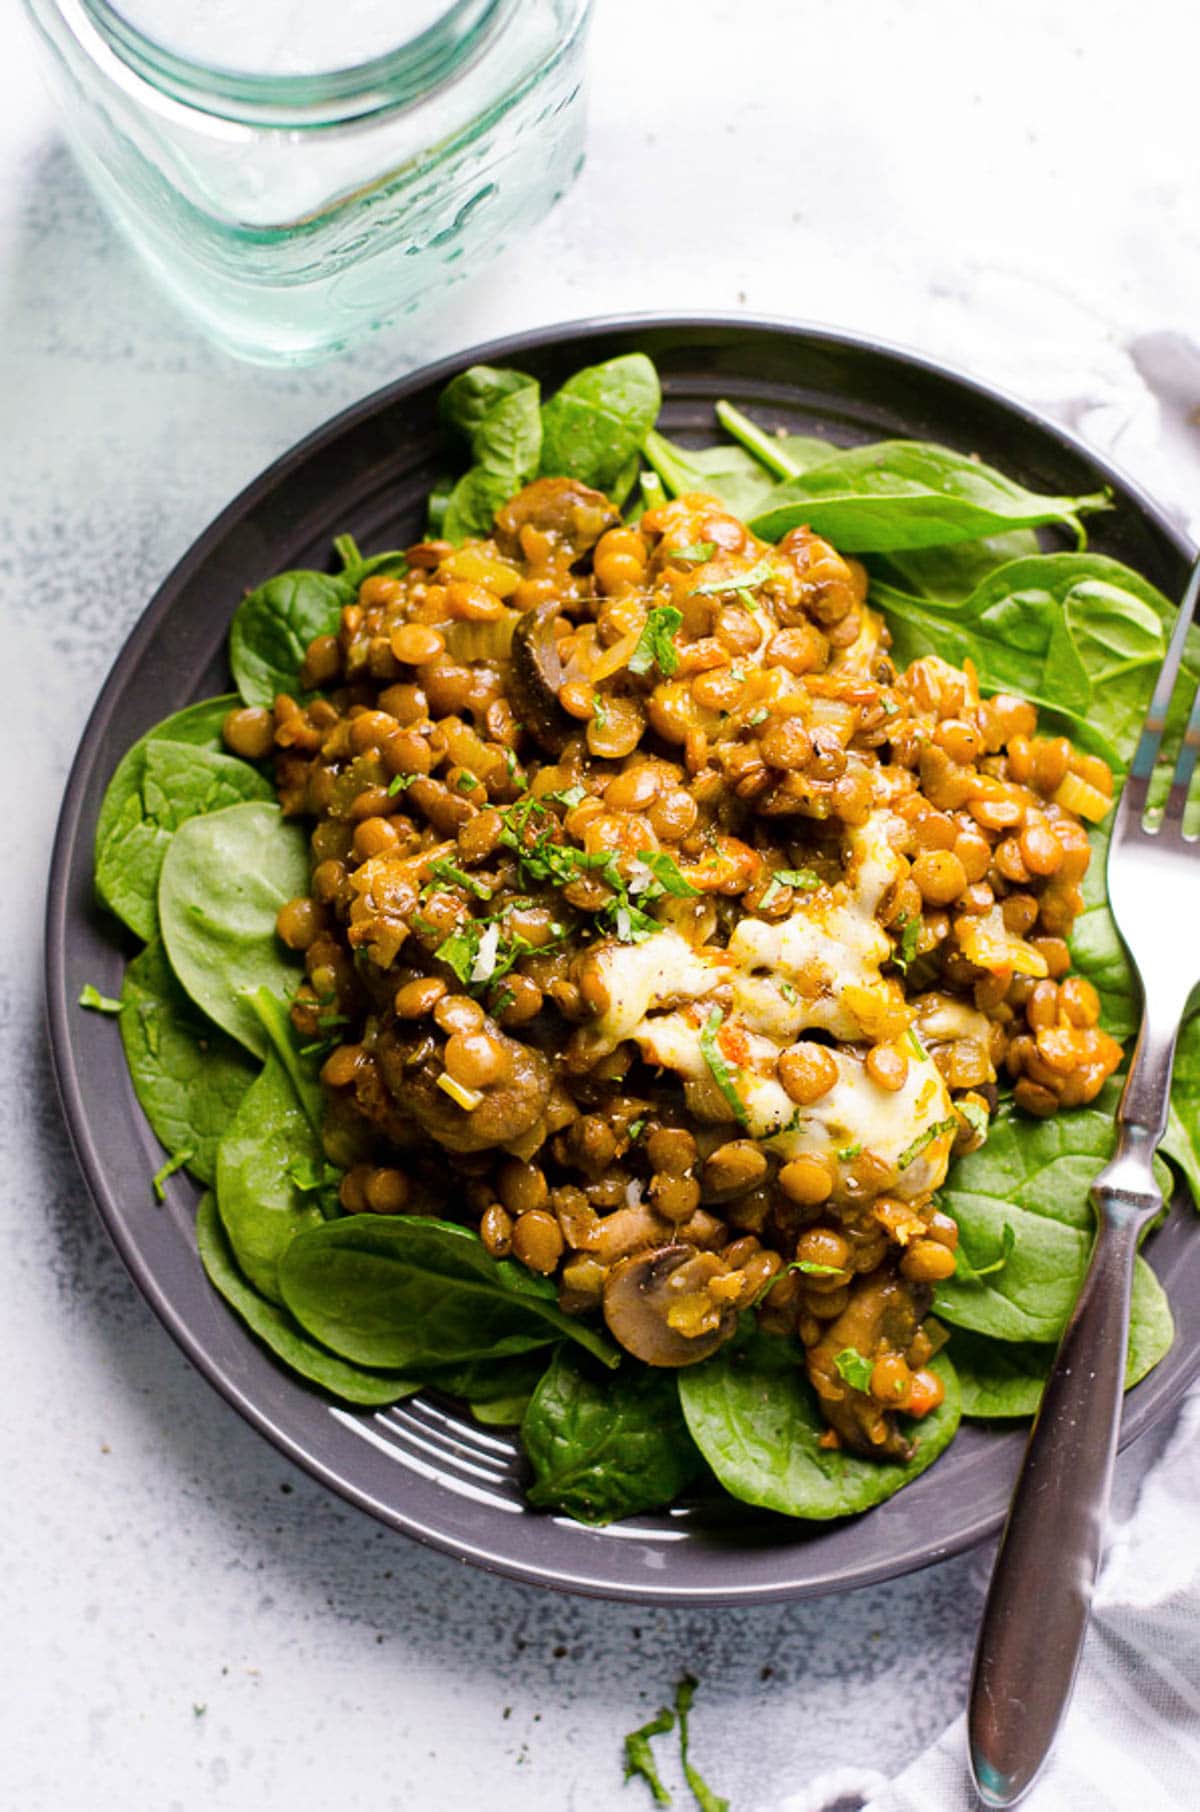 Lentil casserole served on a bed of baby spinach on a plate with a fork.